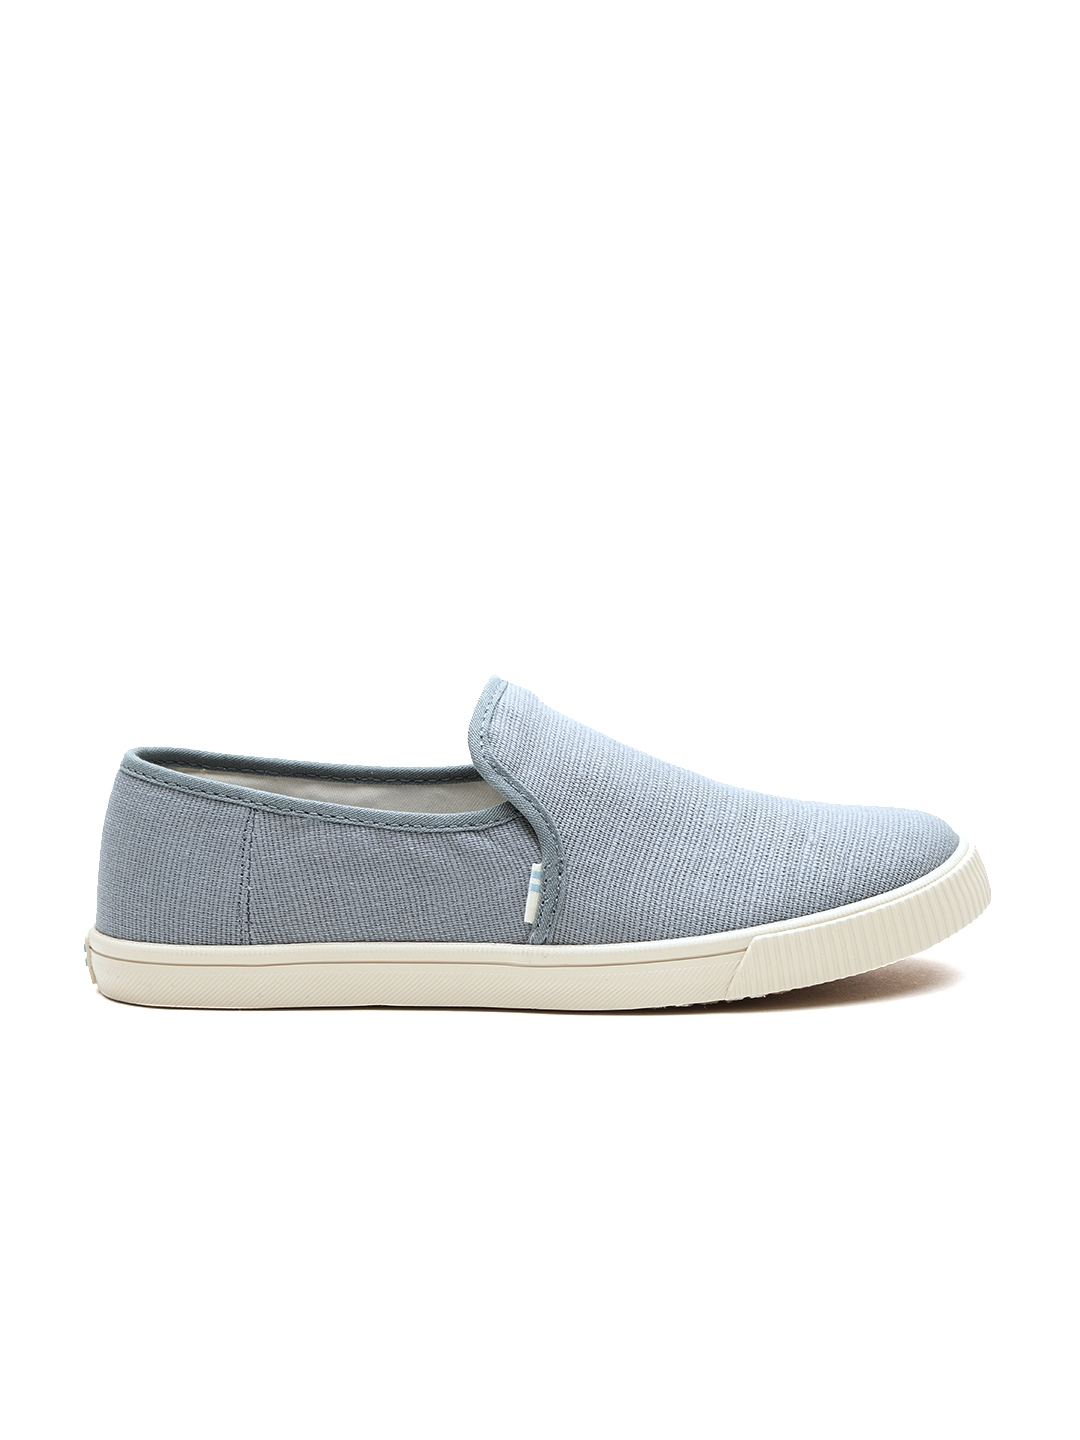 Buy TOMS Women Blue Slip On Sneakers - Casual Shoes for Women 9556181 ...